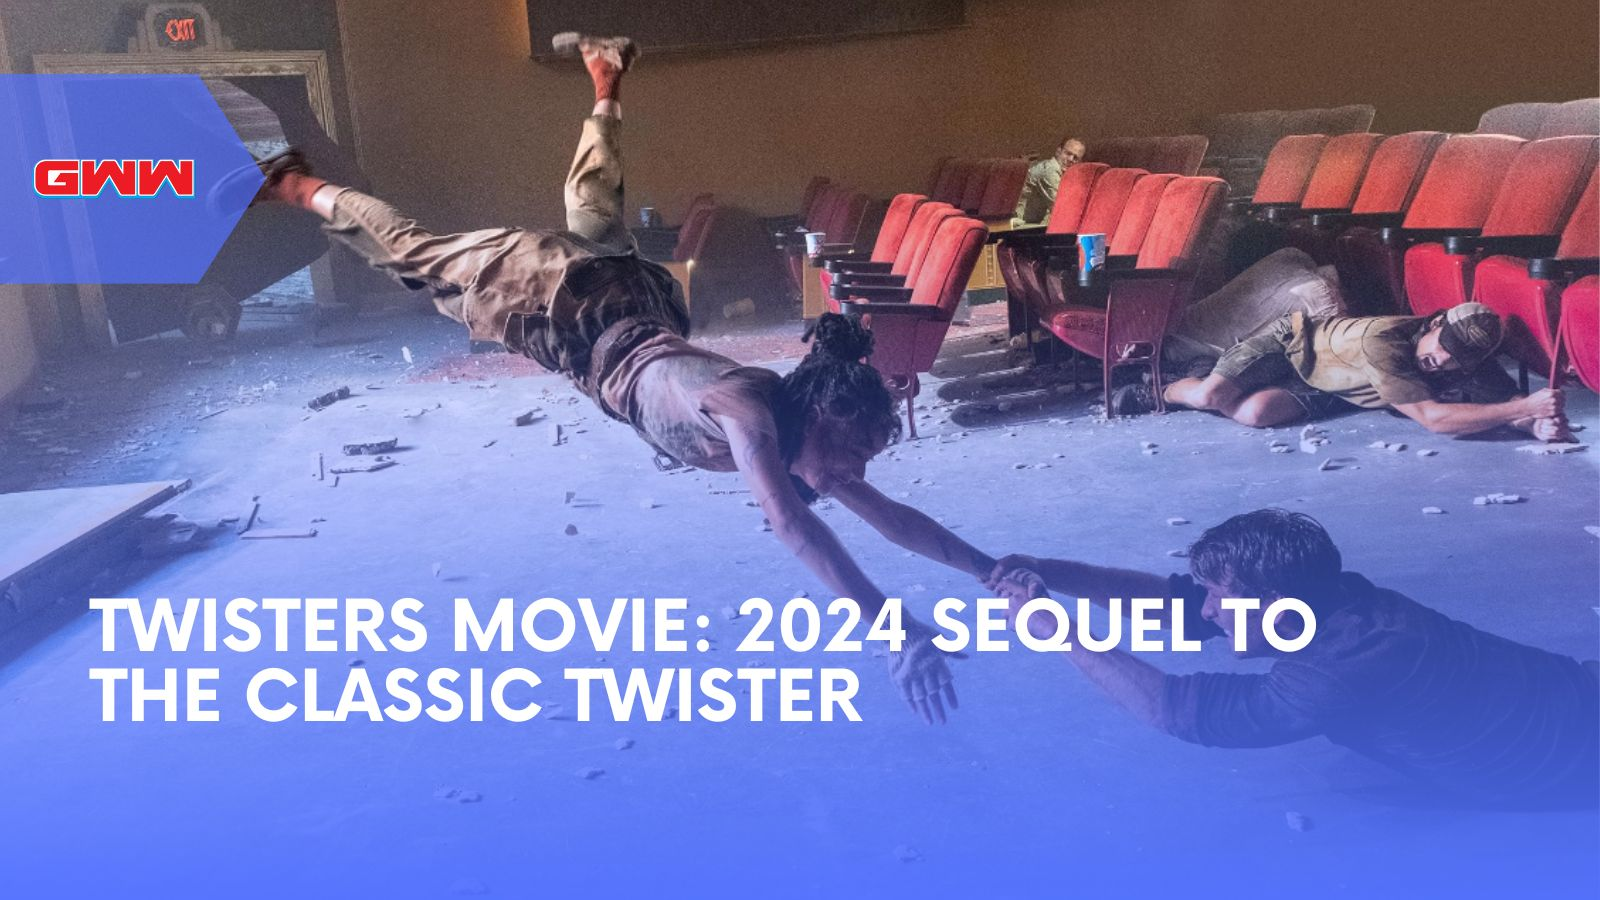 Twisters Movie: 2024 Sequel to the Classic Twister